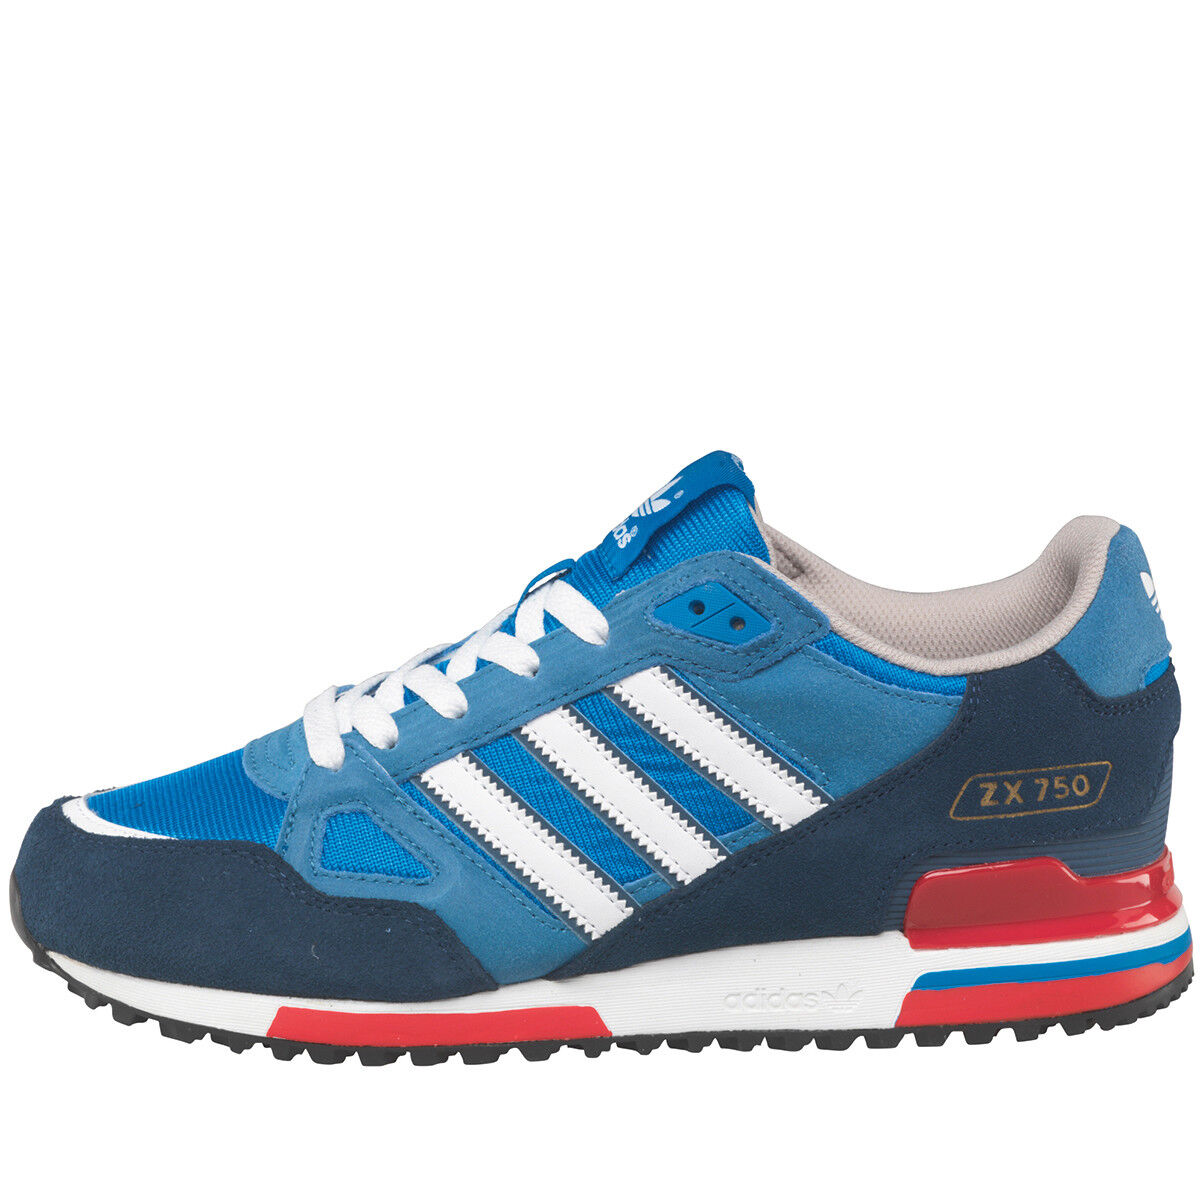 adidas Originals Mens ZX 750 Trainers Bluebird/Blue/Navy/Red/White/ All  Sizes